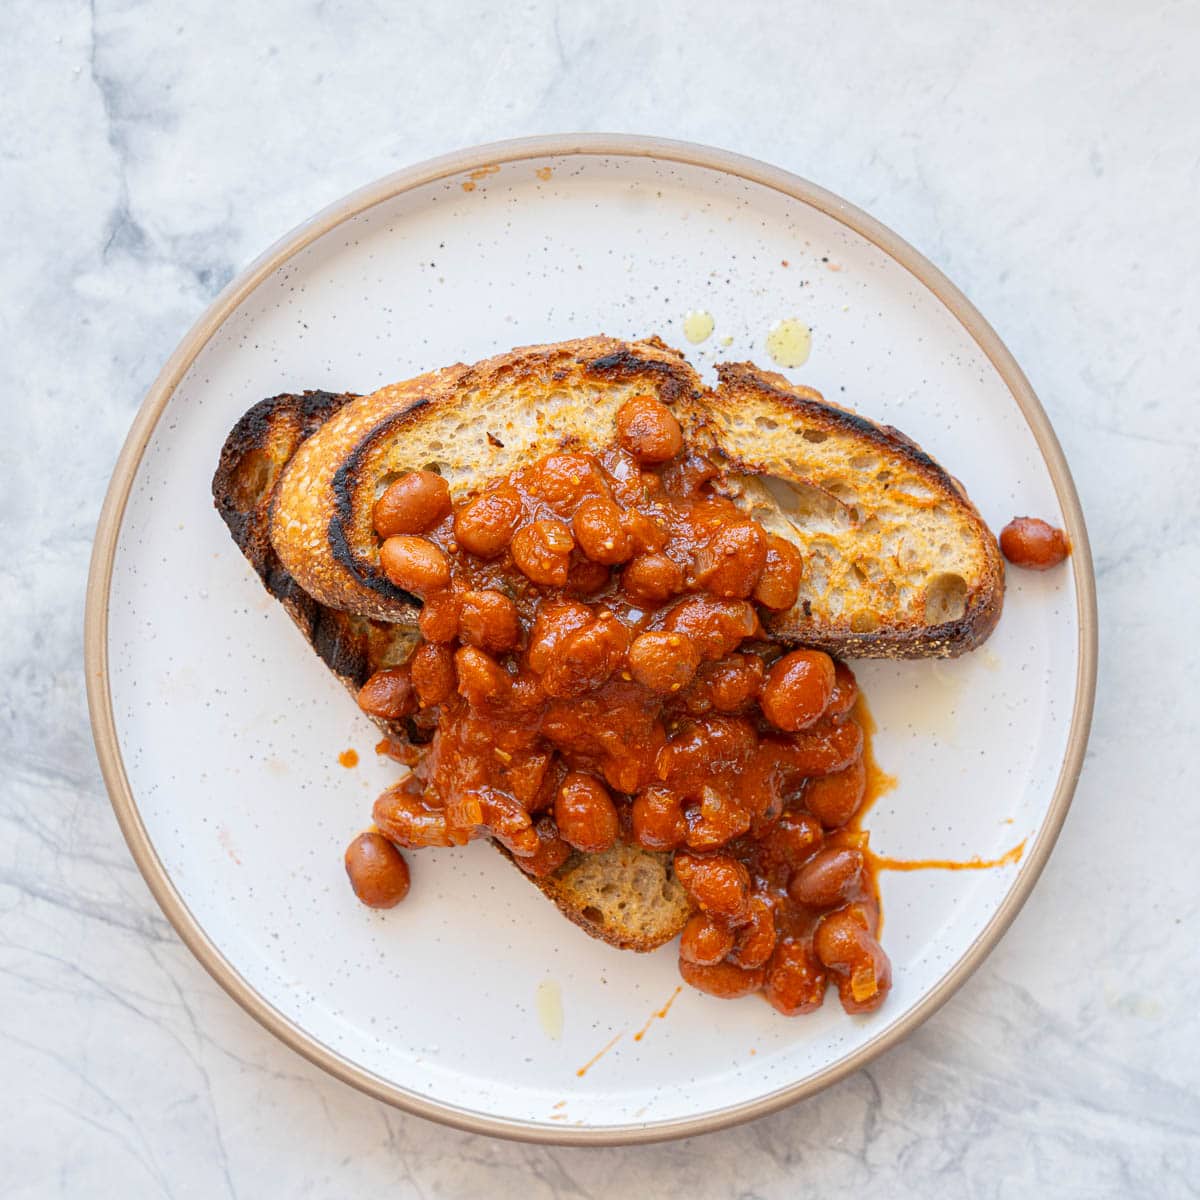 Two slices of rustic toast topped with baked beans on a white plate with brown rim.